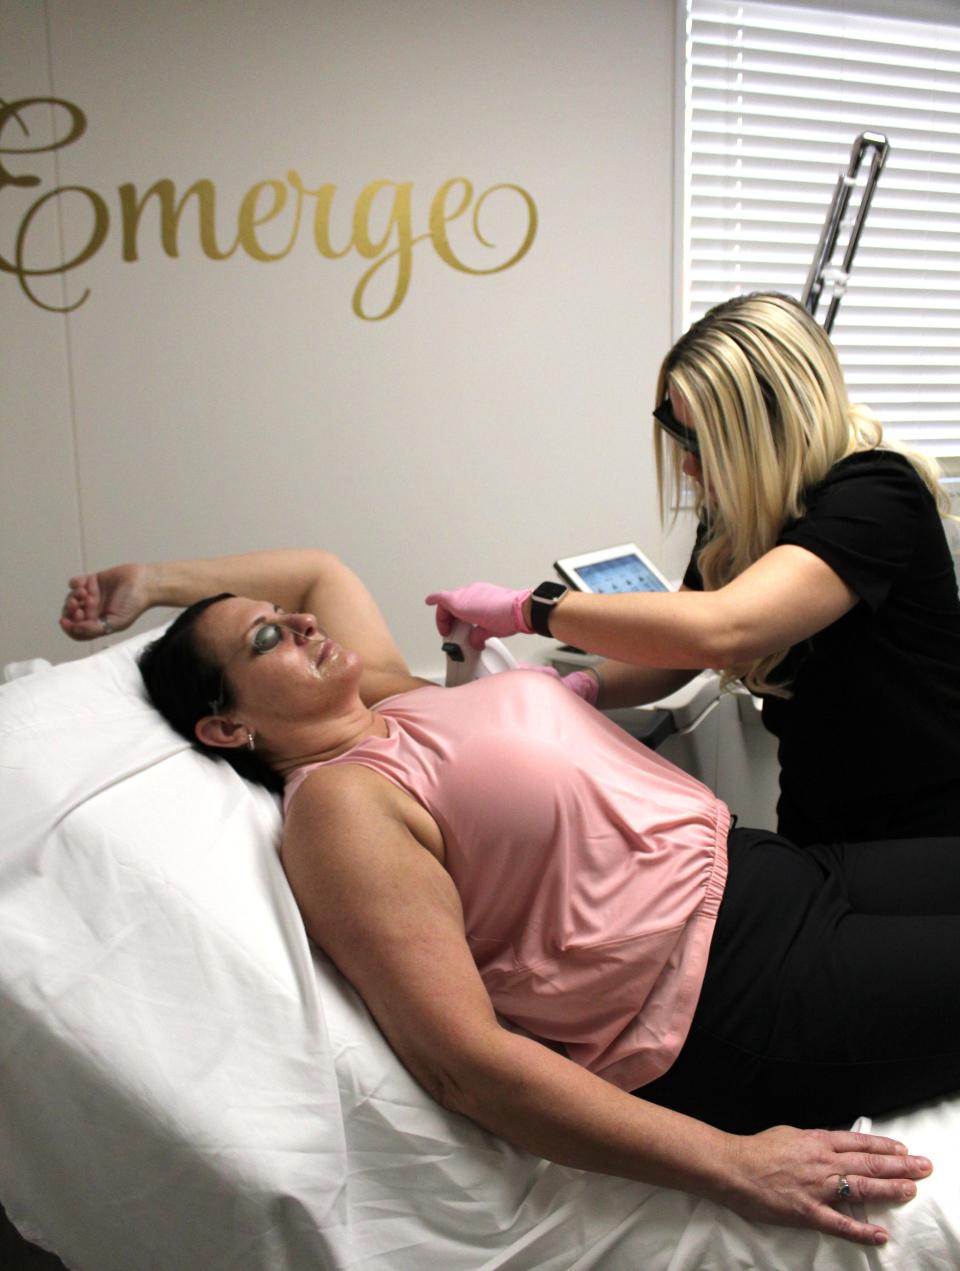 Karen Neely of Westland has an underarm laser hair removal treatment provided by Tiffany Mowinski, lead laser technician at Emerge Medical Spa in Monroe.